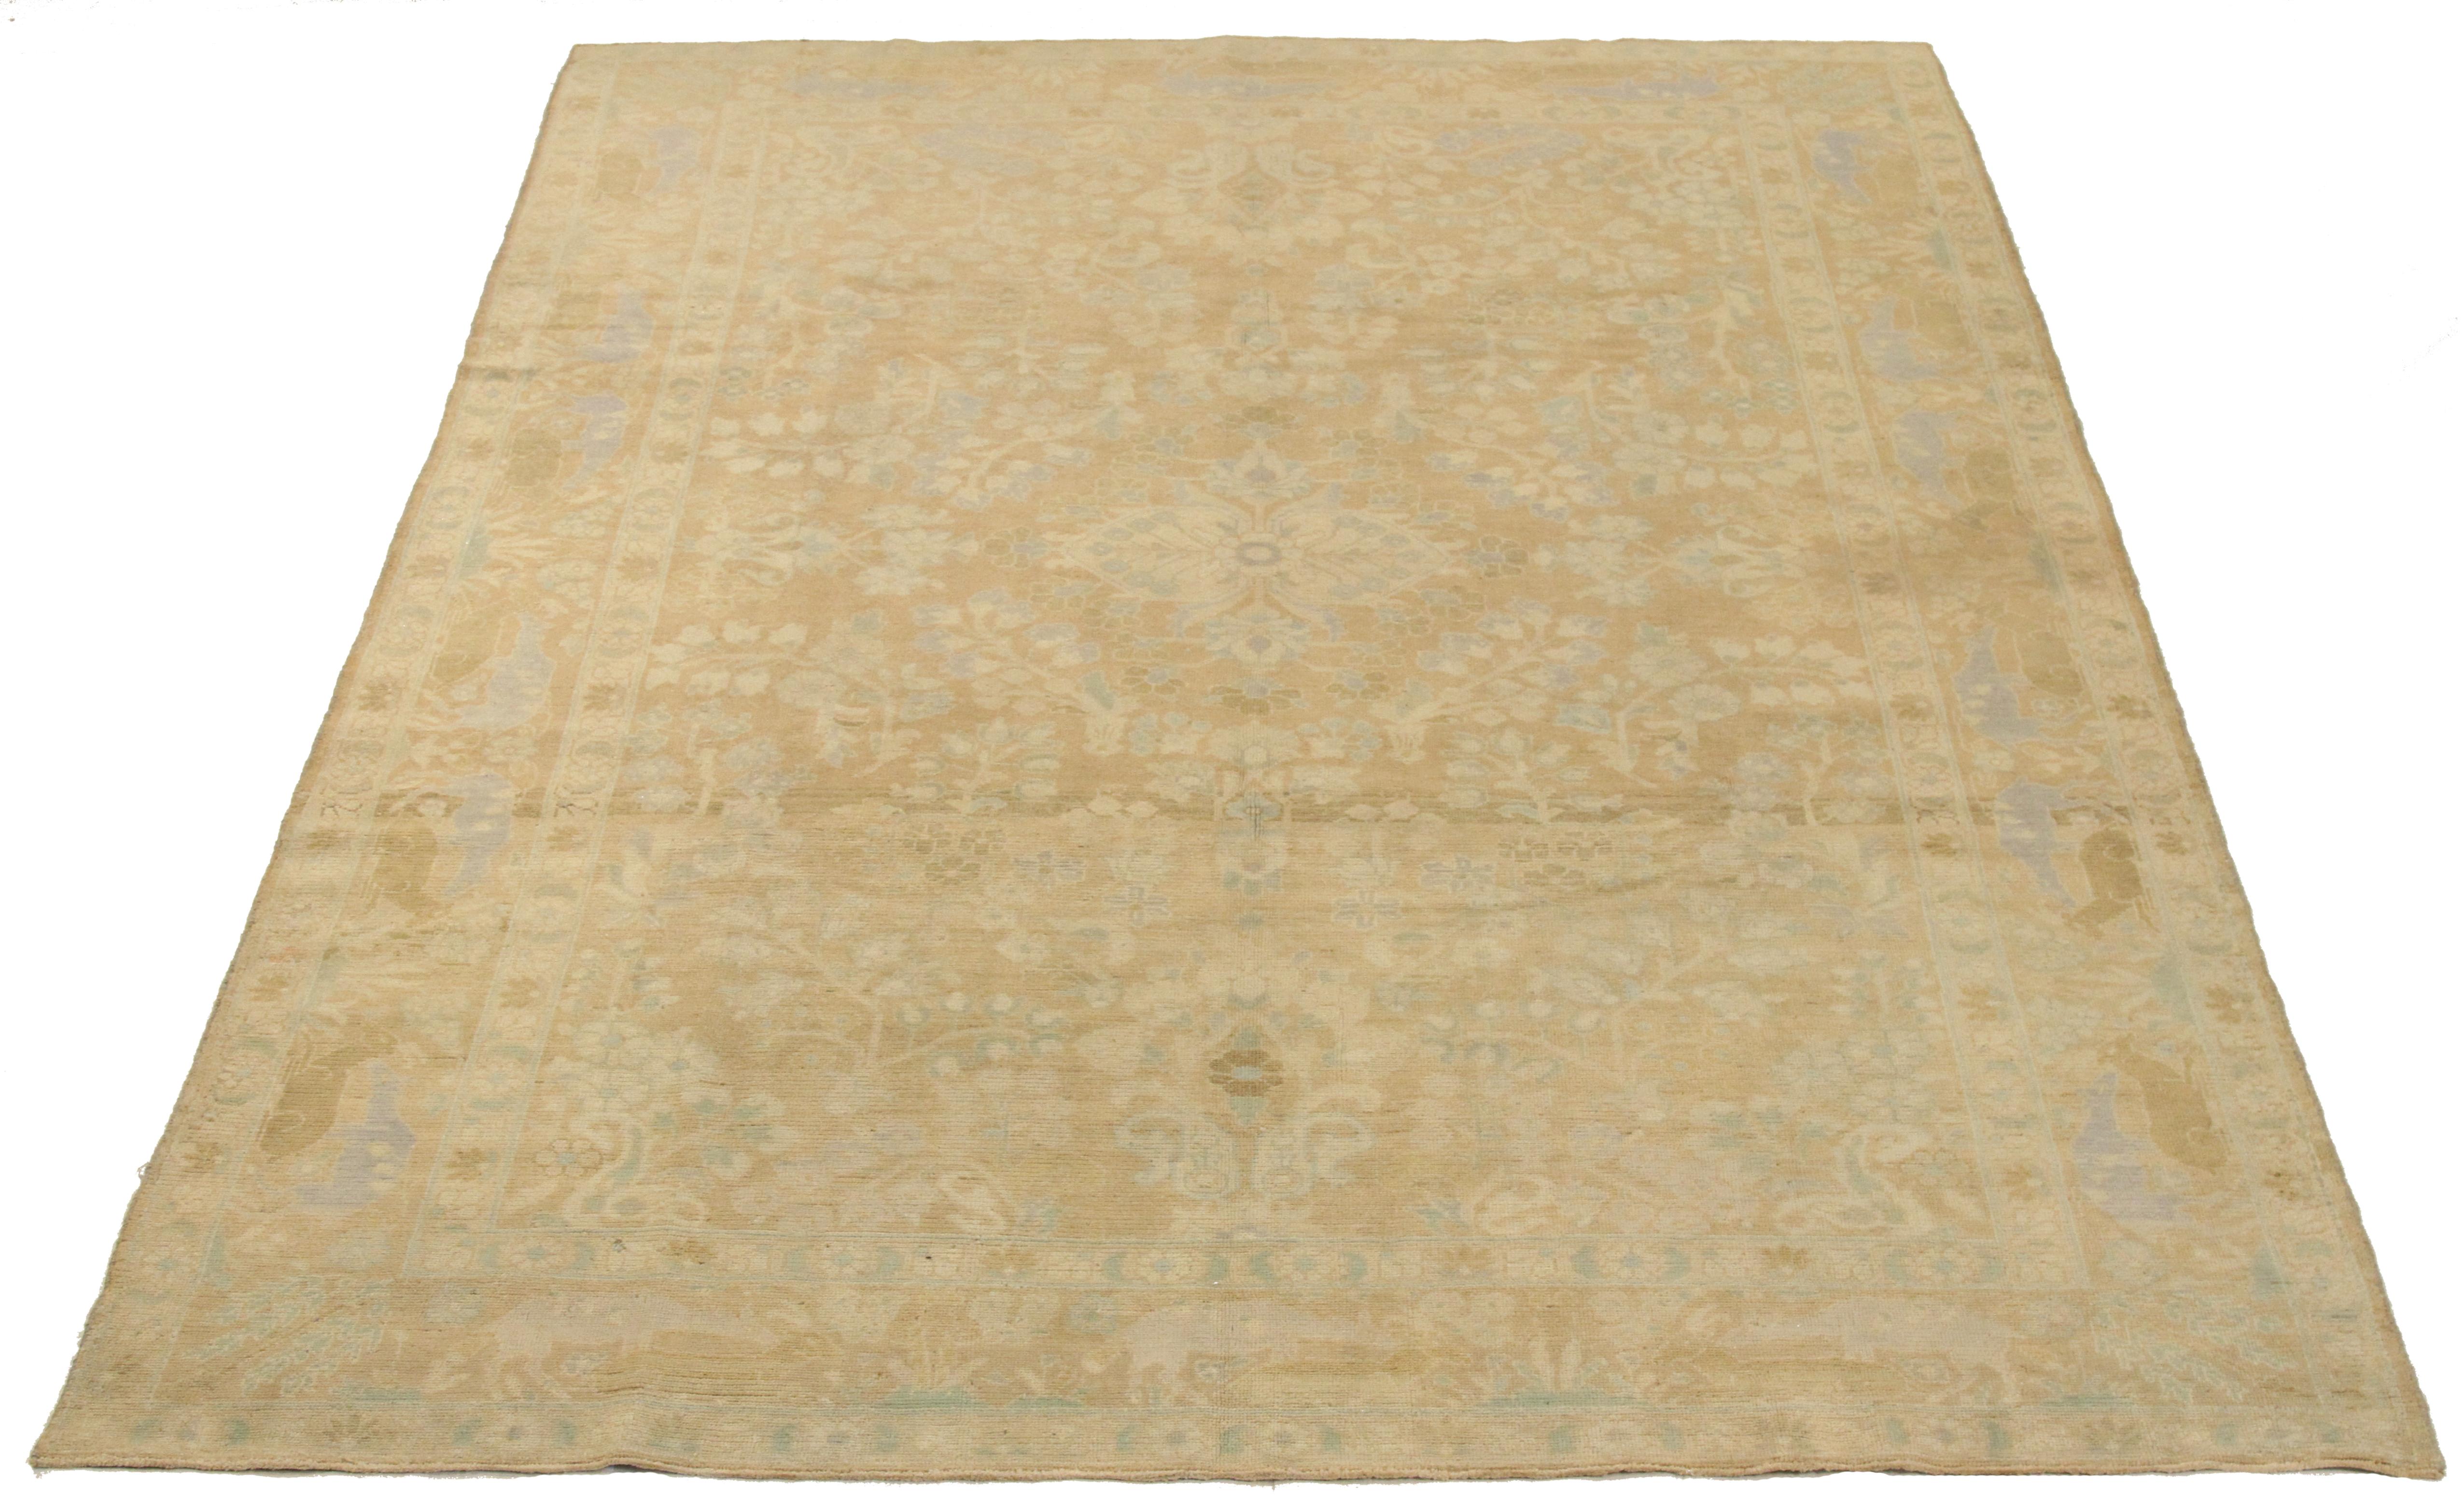 Antique hand-woven Persian area rug made from fine wool and all-natural vegetable dyes that are safe for people and pets. It features traditional Malayer weaving depicting elaborate 'Boteh' patterns that represents life and eternity in Persian